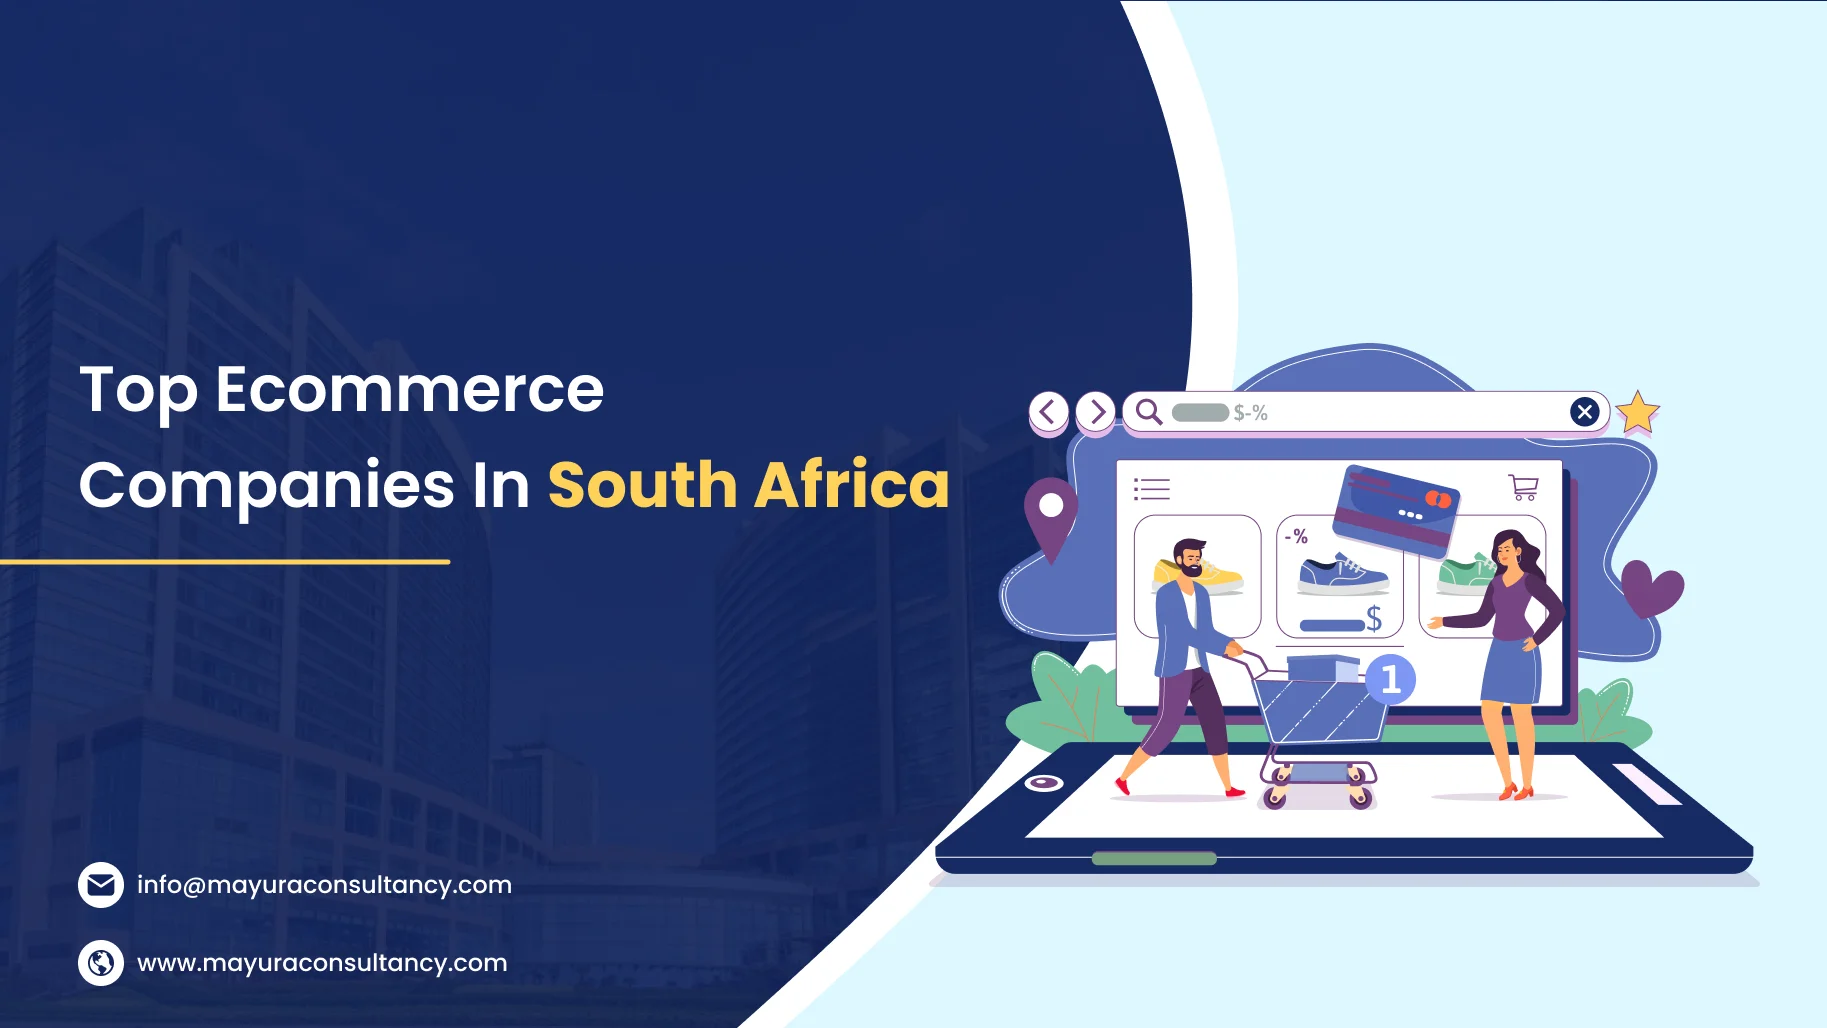 Top Ecommerce Companies in South Africa